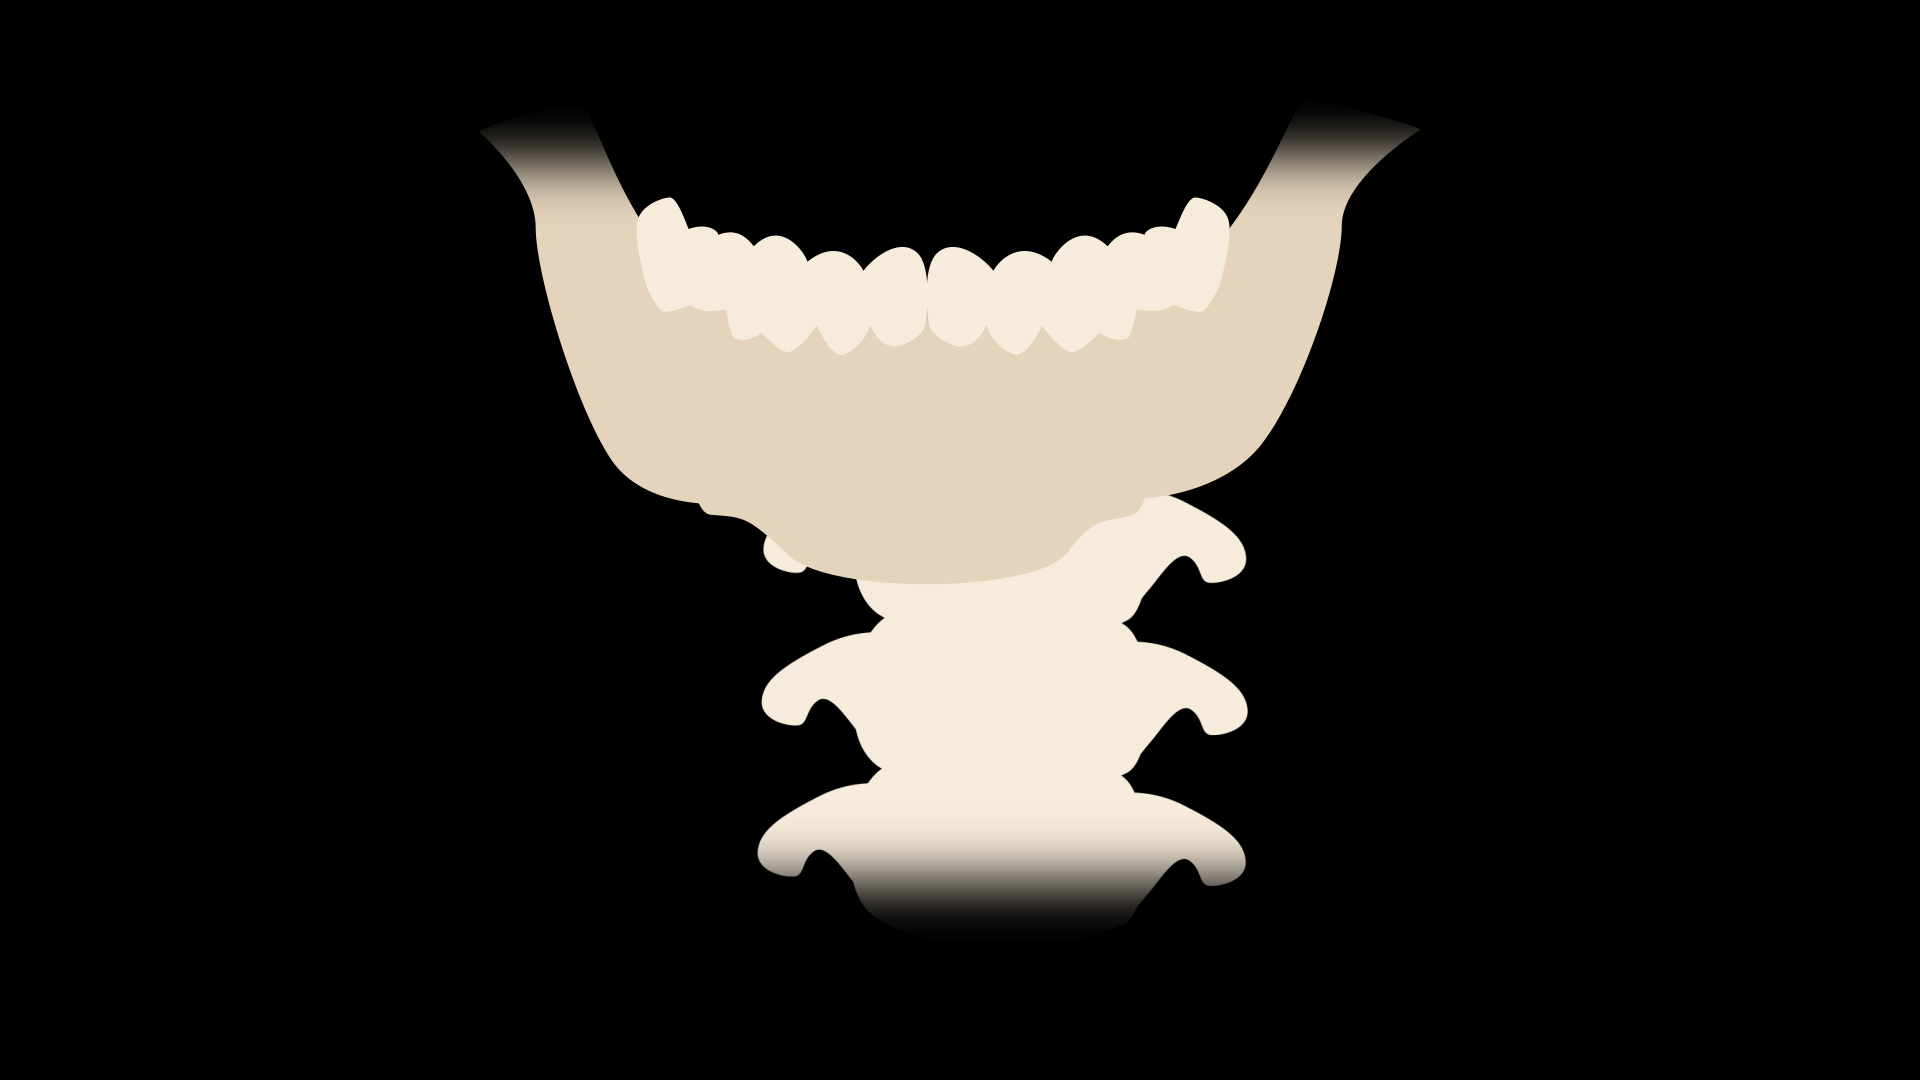 <p>This joint can only do the rotation movement, and is unable to do any other movement. One example of this is the neck (specifically where the atlas and axis cervical vertebrae meet).</p>